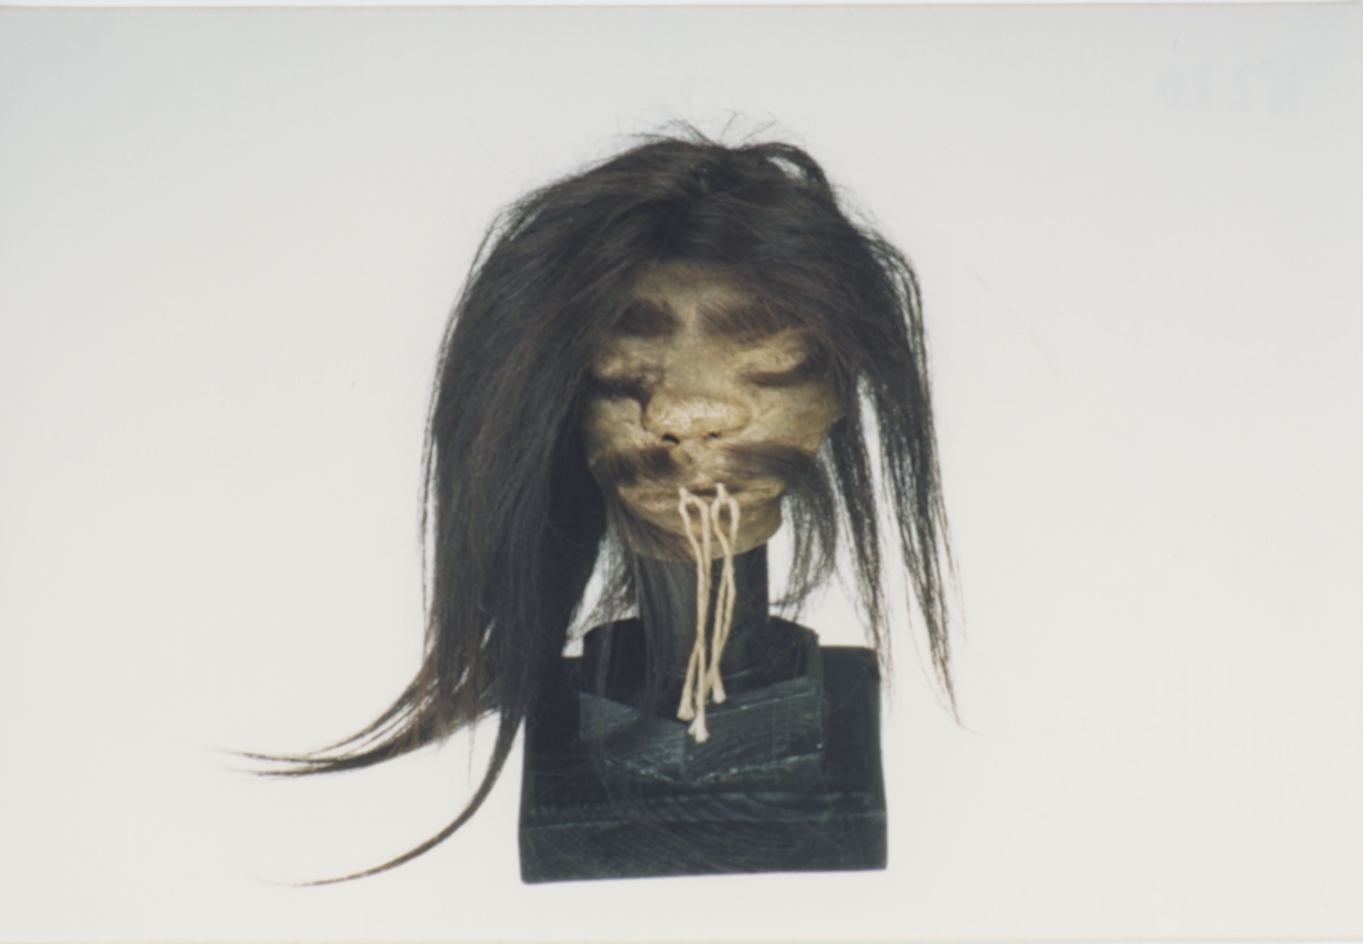 You can see a sculpture made of animal skins and animal hair from which a real-looking shrunken head of a human being was made. The shrunken head has long black hair, a black moustache and a light-coloured braided chin beard.